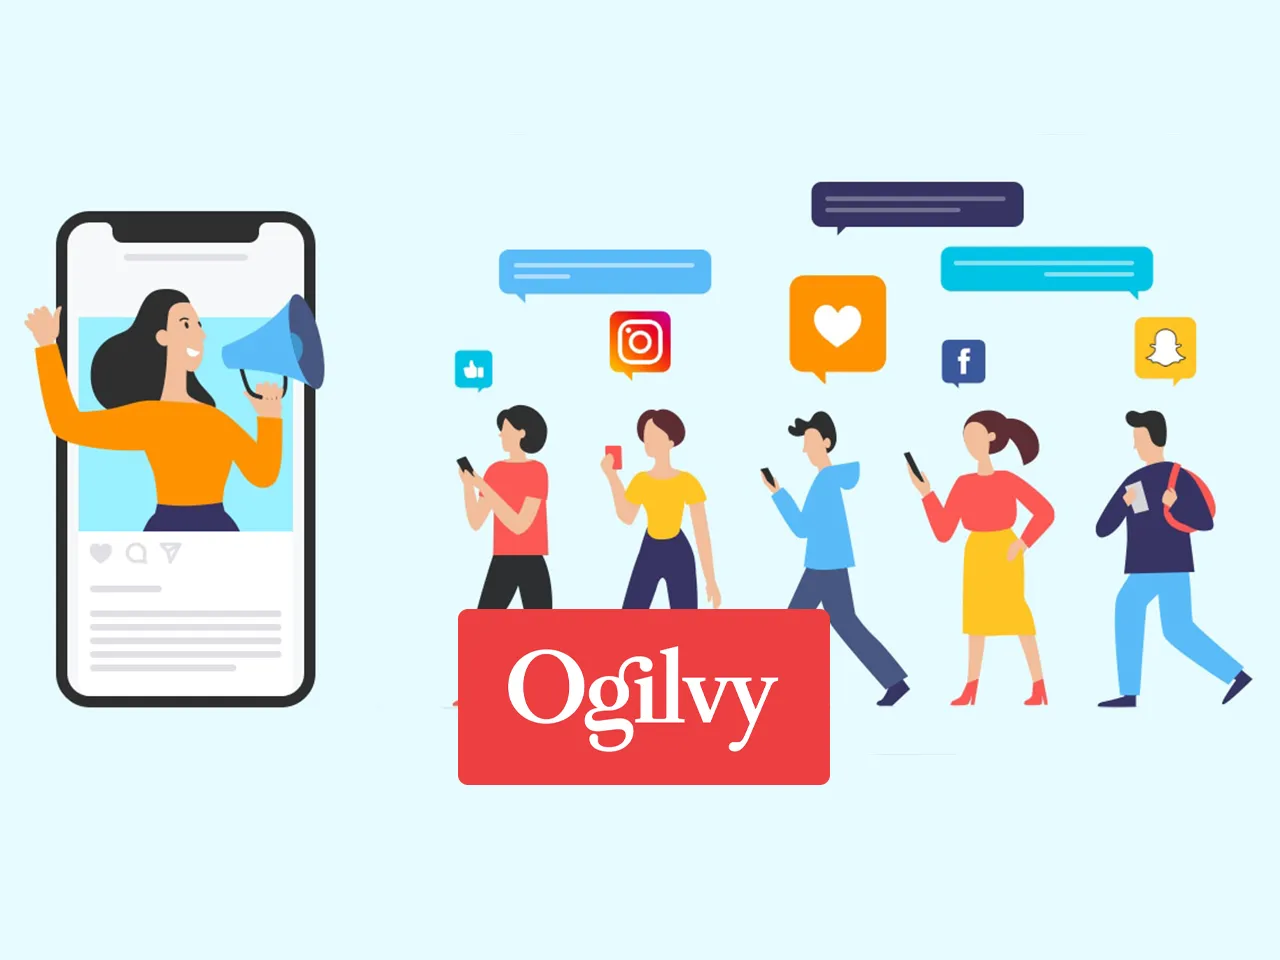 96% of the creator economy is yet to be tapped into: Ogilvy Report